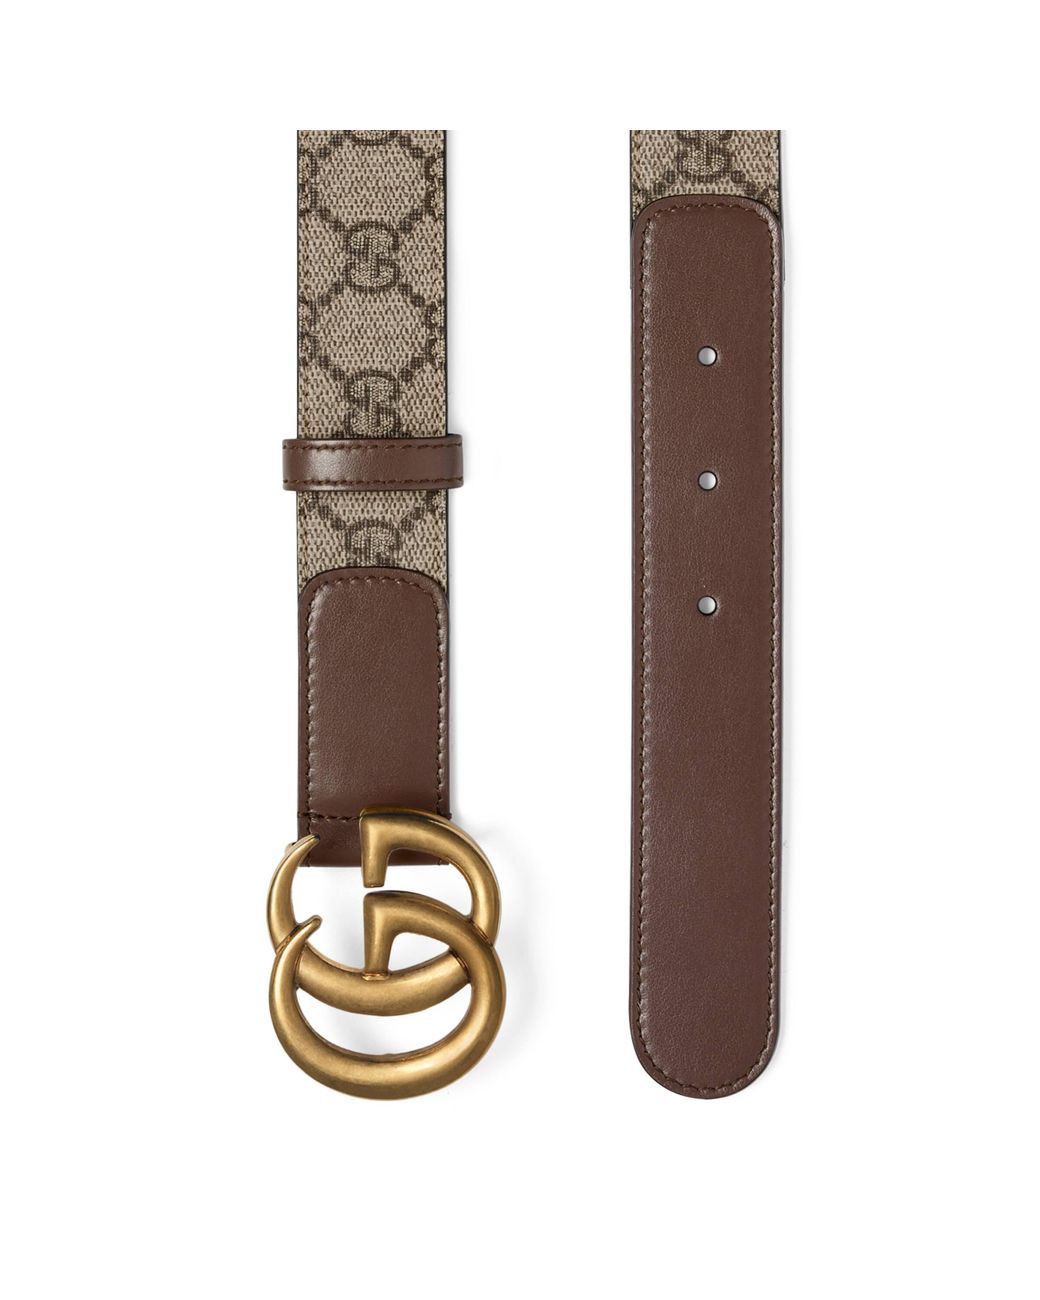 Gucci Leather GG Belt With Double Buckle in Brown Save 14% - Lyst